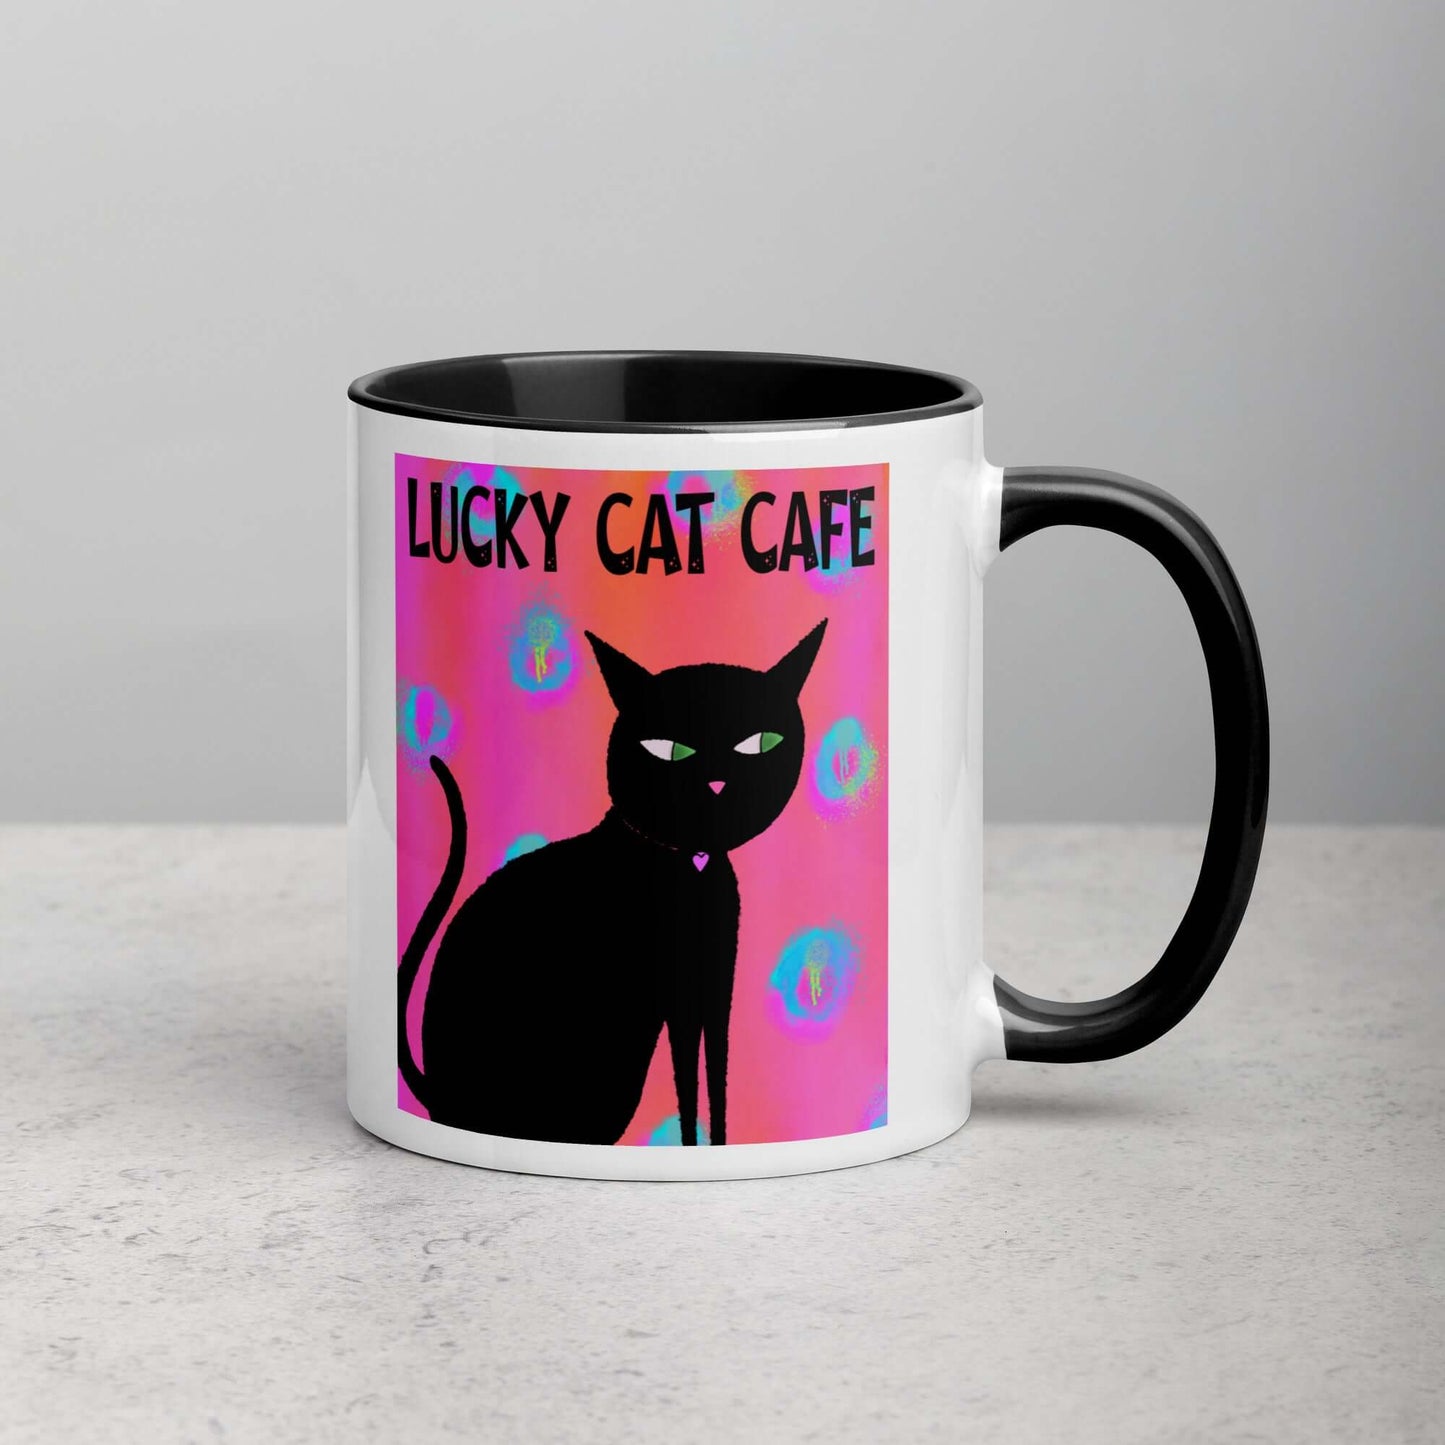 Black Cat on Hot Pink Tie Dye Background with Text “Lucky Cat Cafe” Mug with Black Color Inside Right Handed Front View